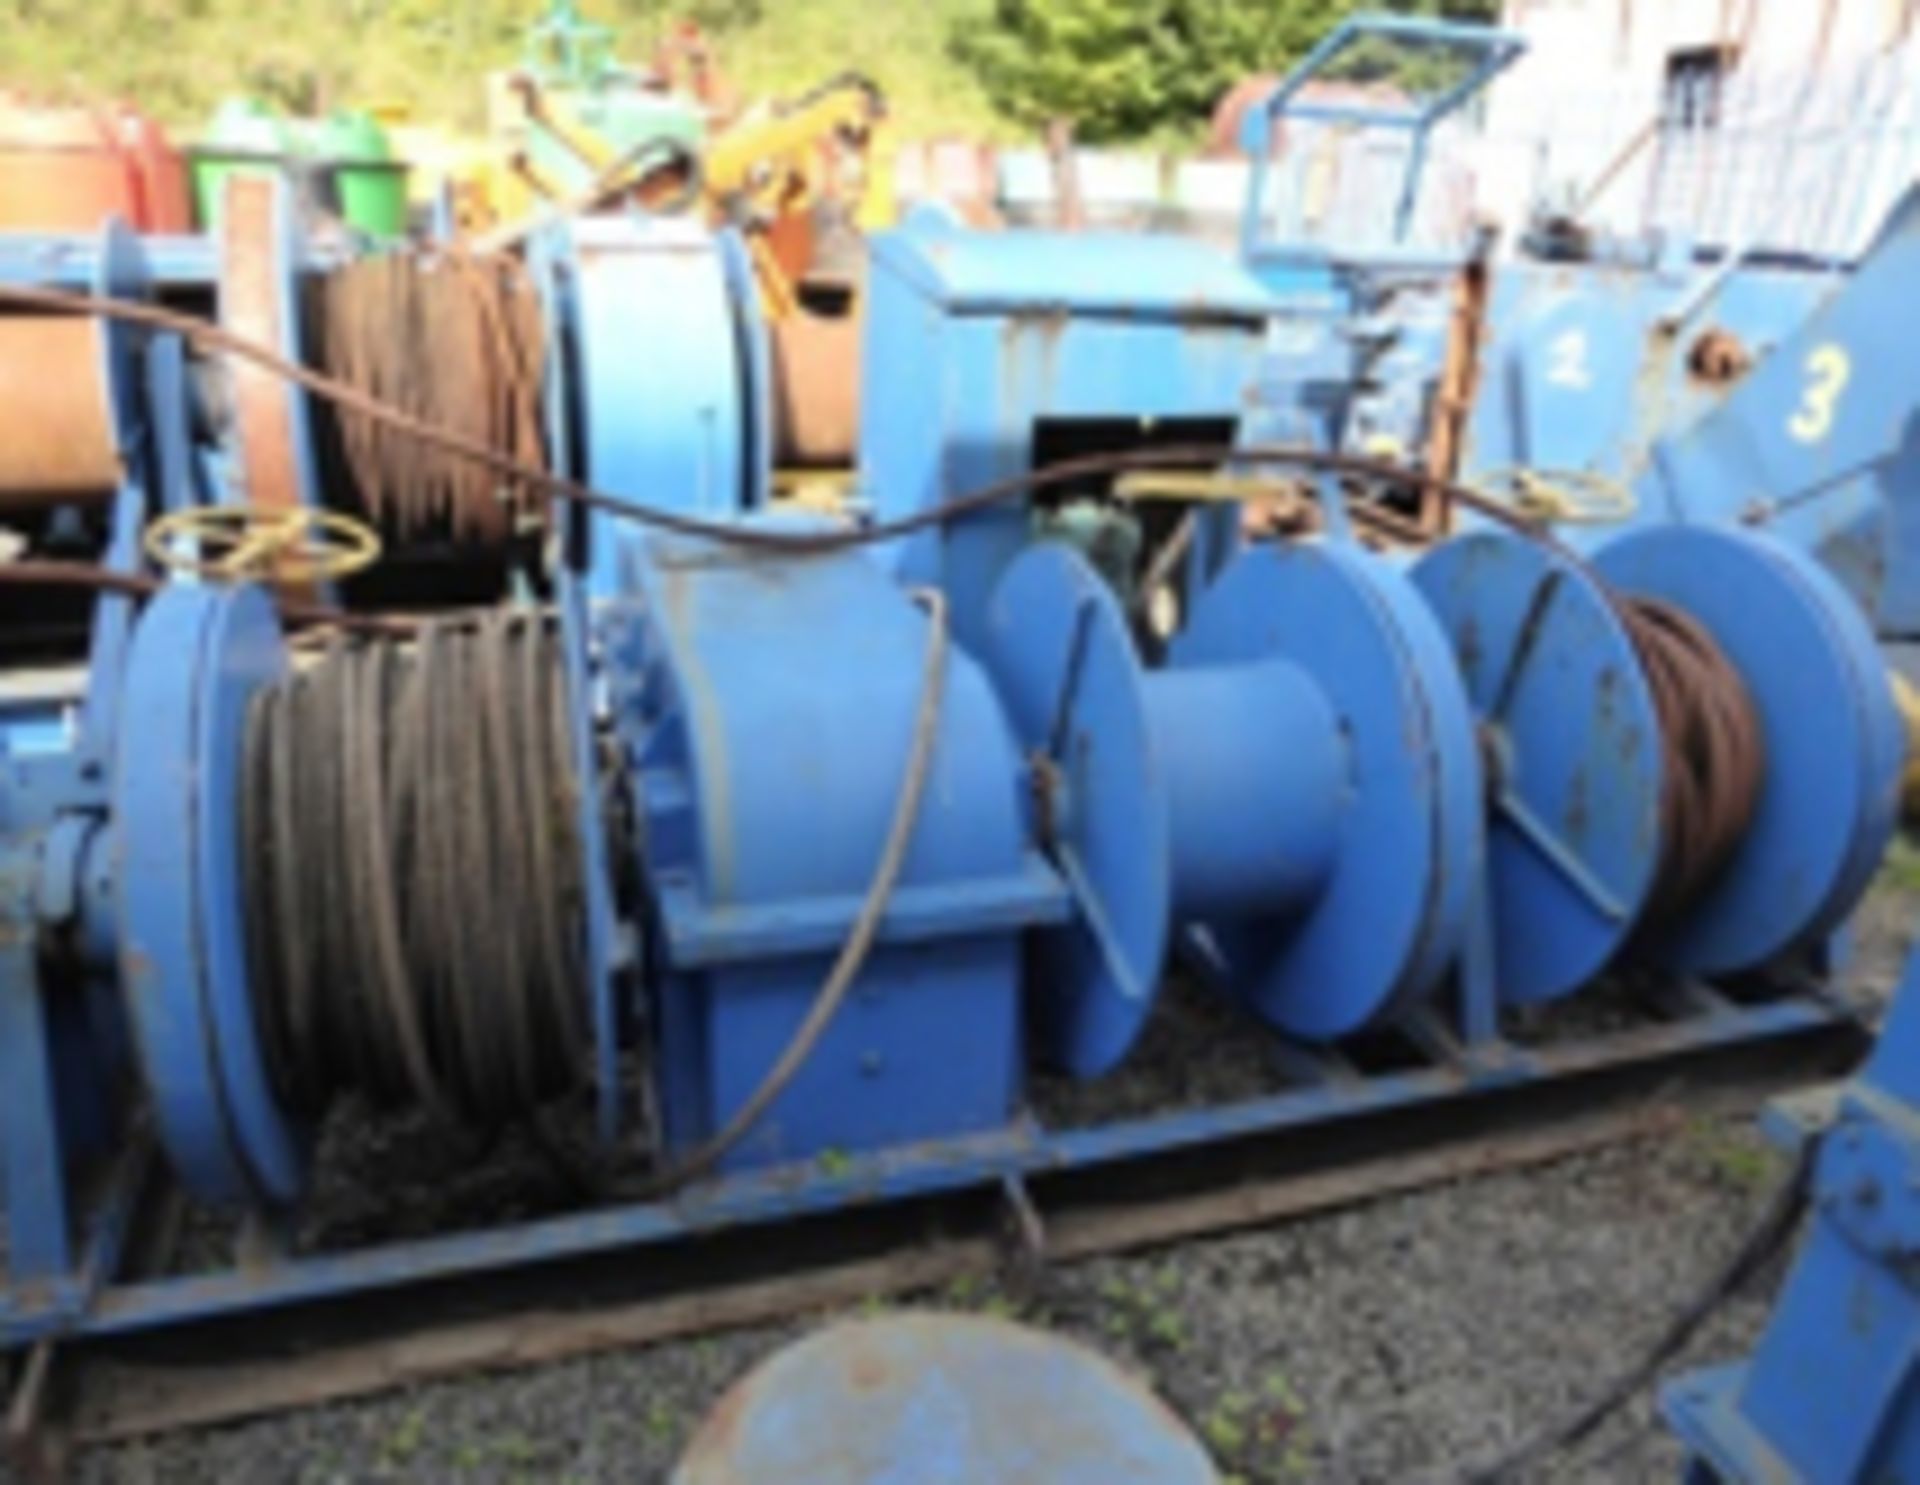 TRIPLE DRUM WINCH 2 cylinder Lister diesel engine. Overall condition reasonable. Engine condition un